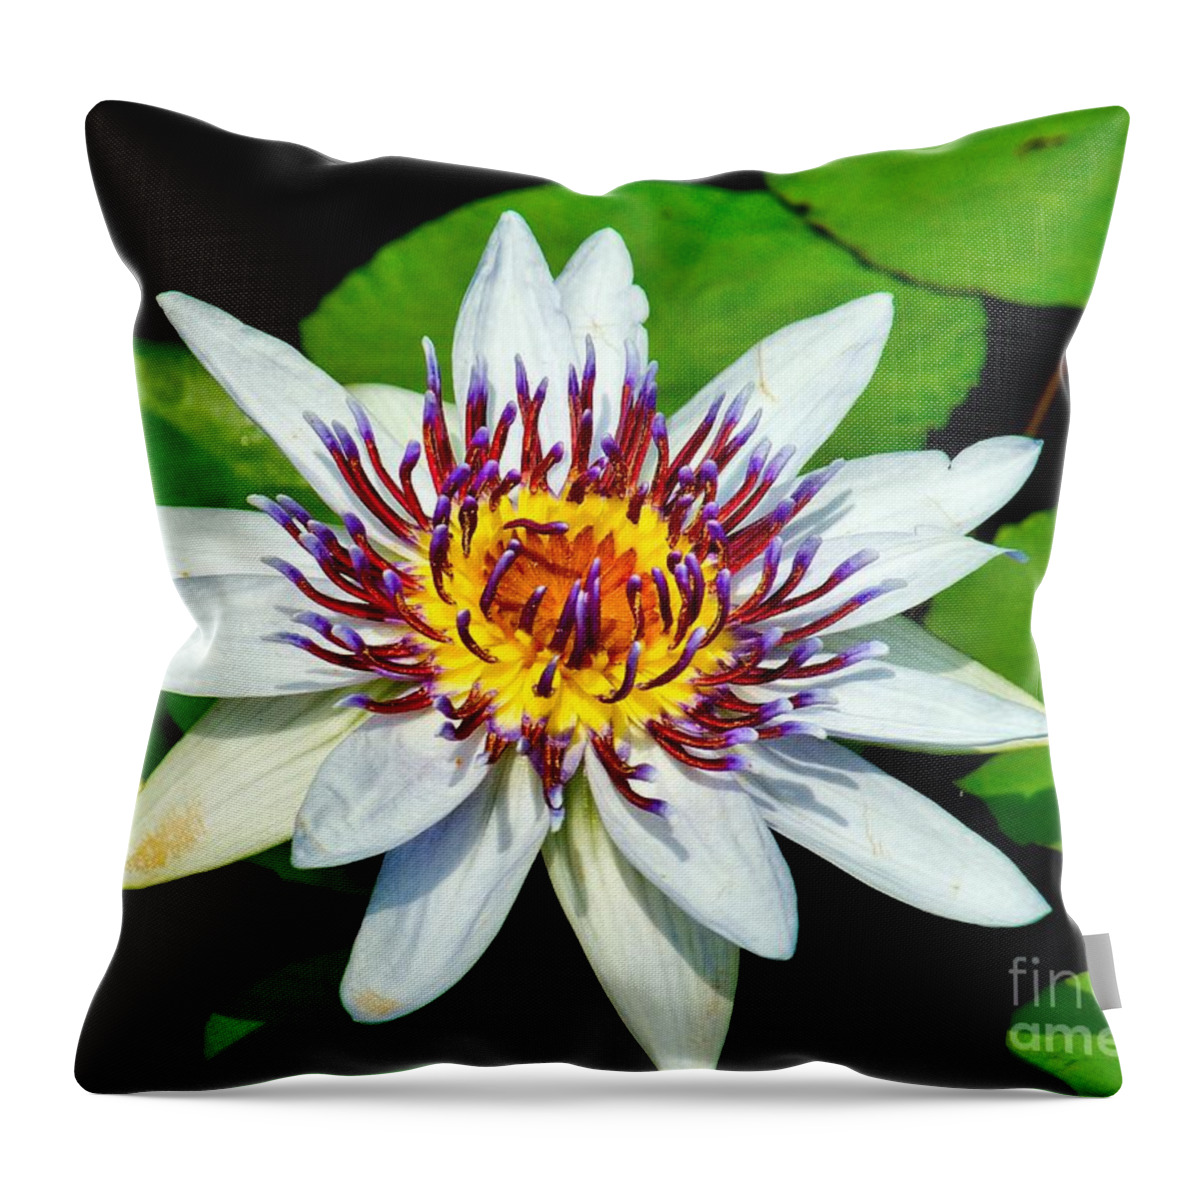 Aquatic Throw Pillow featuring the photograph Lily on the Water by Nick Zelinsky Jr